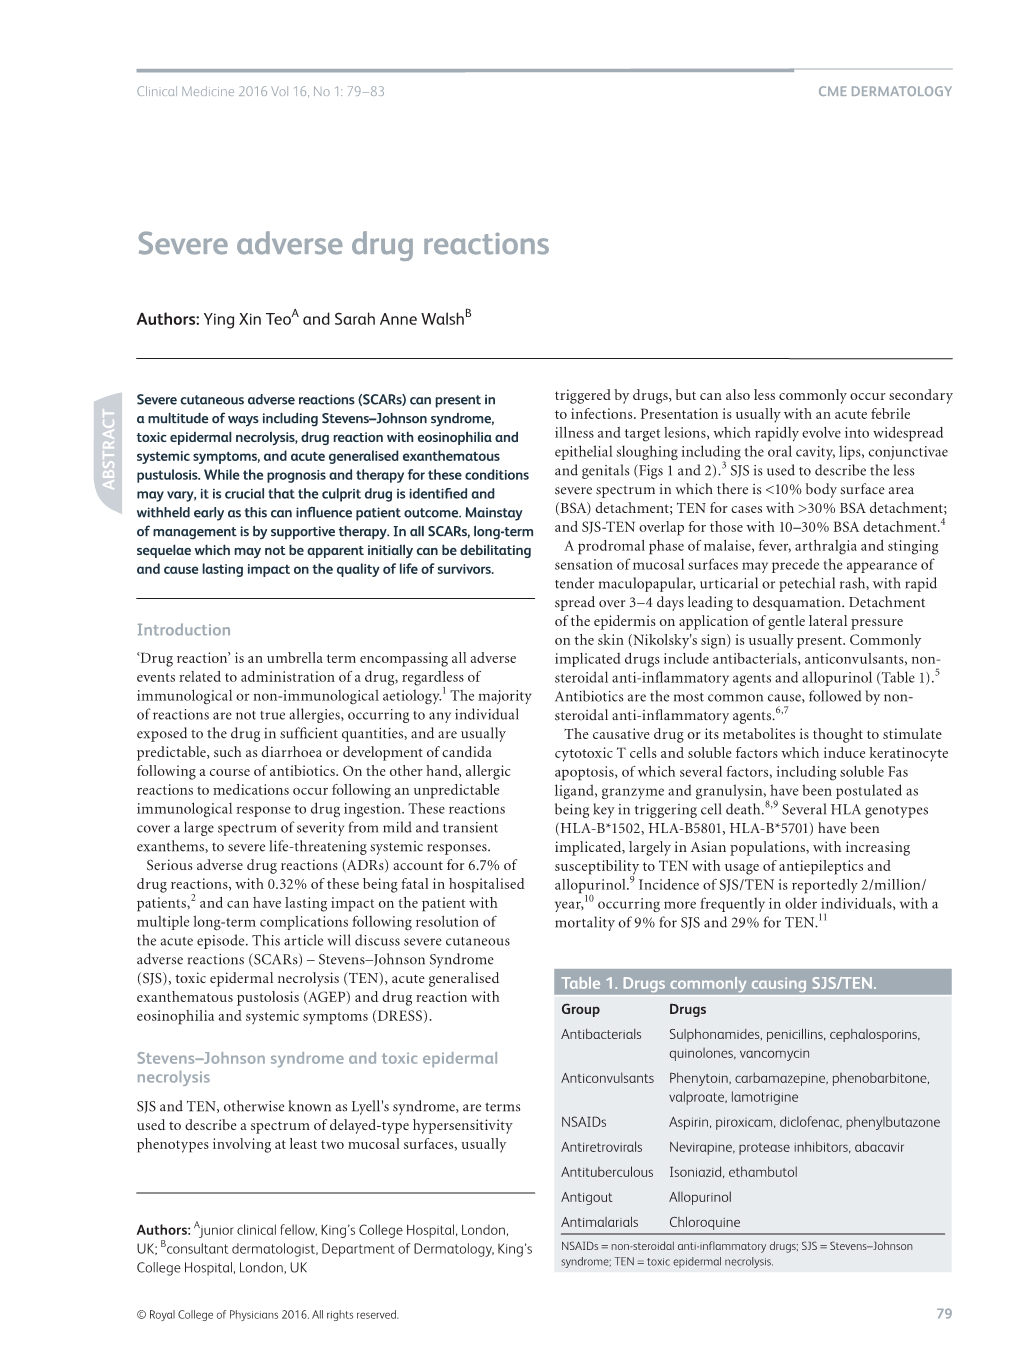 Severe Adverse Drug Reactions